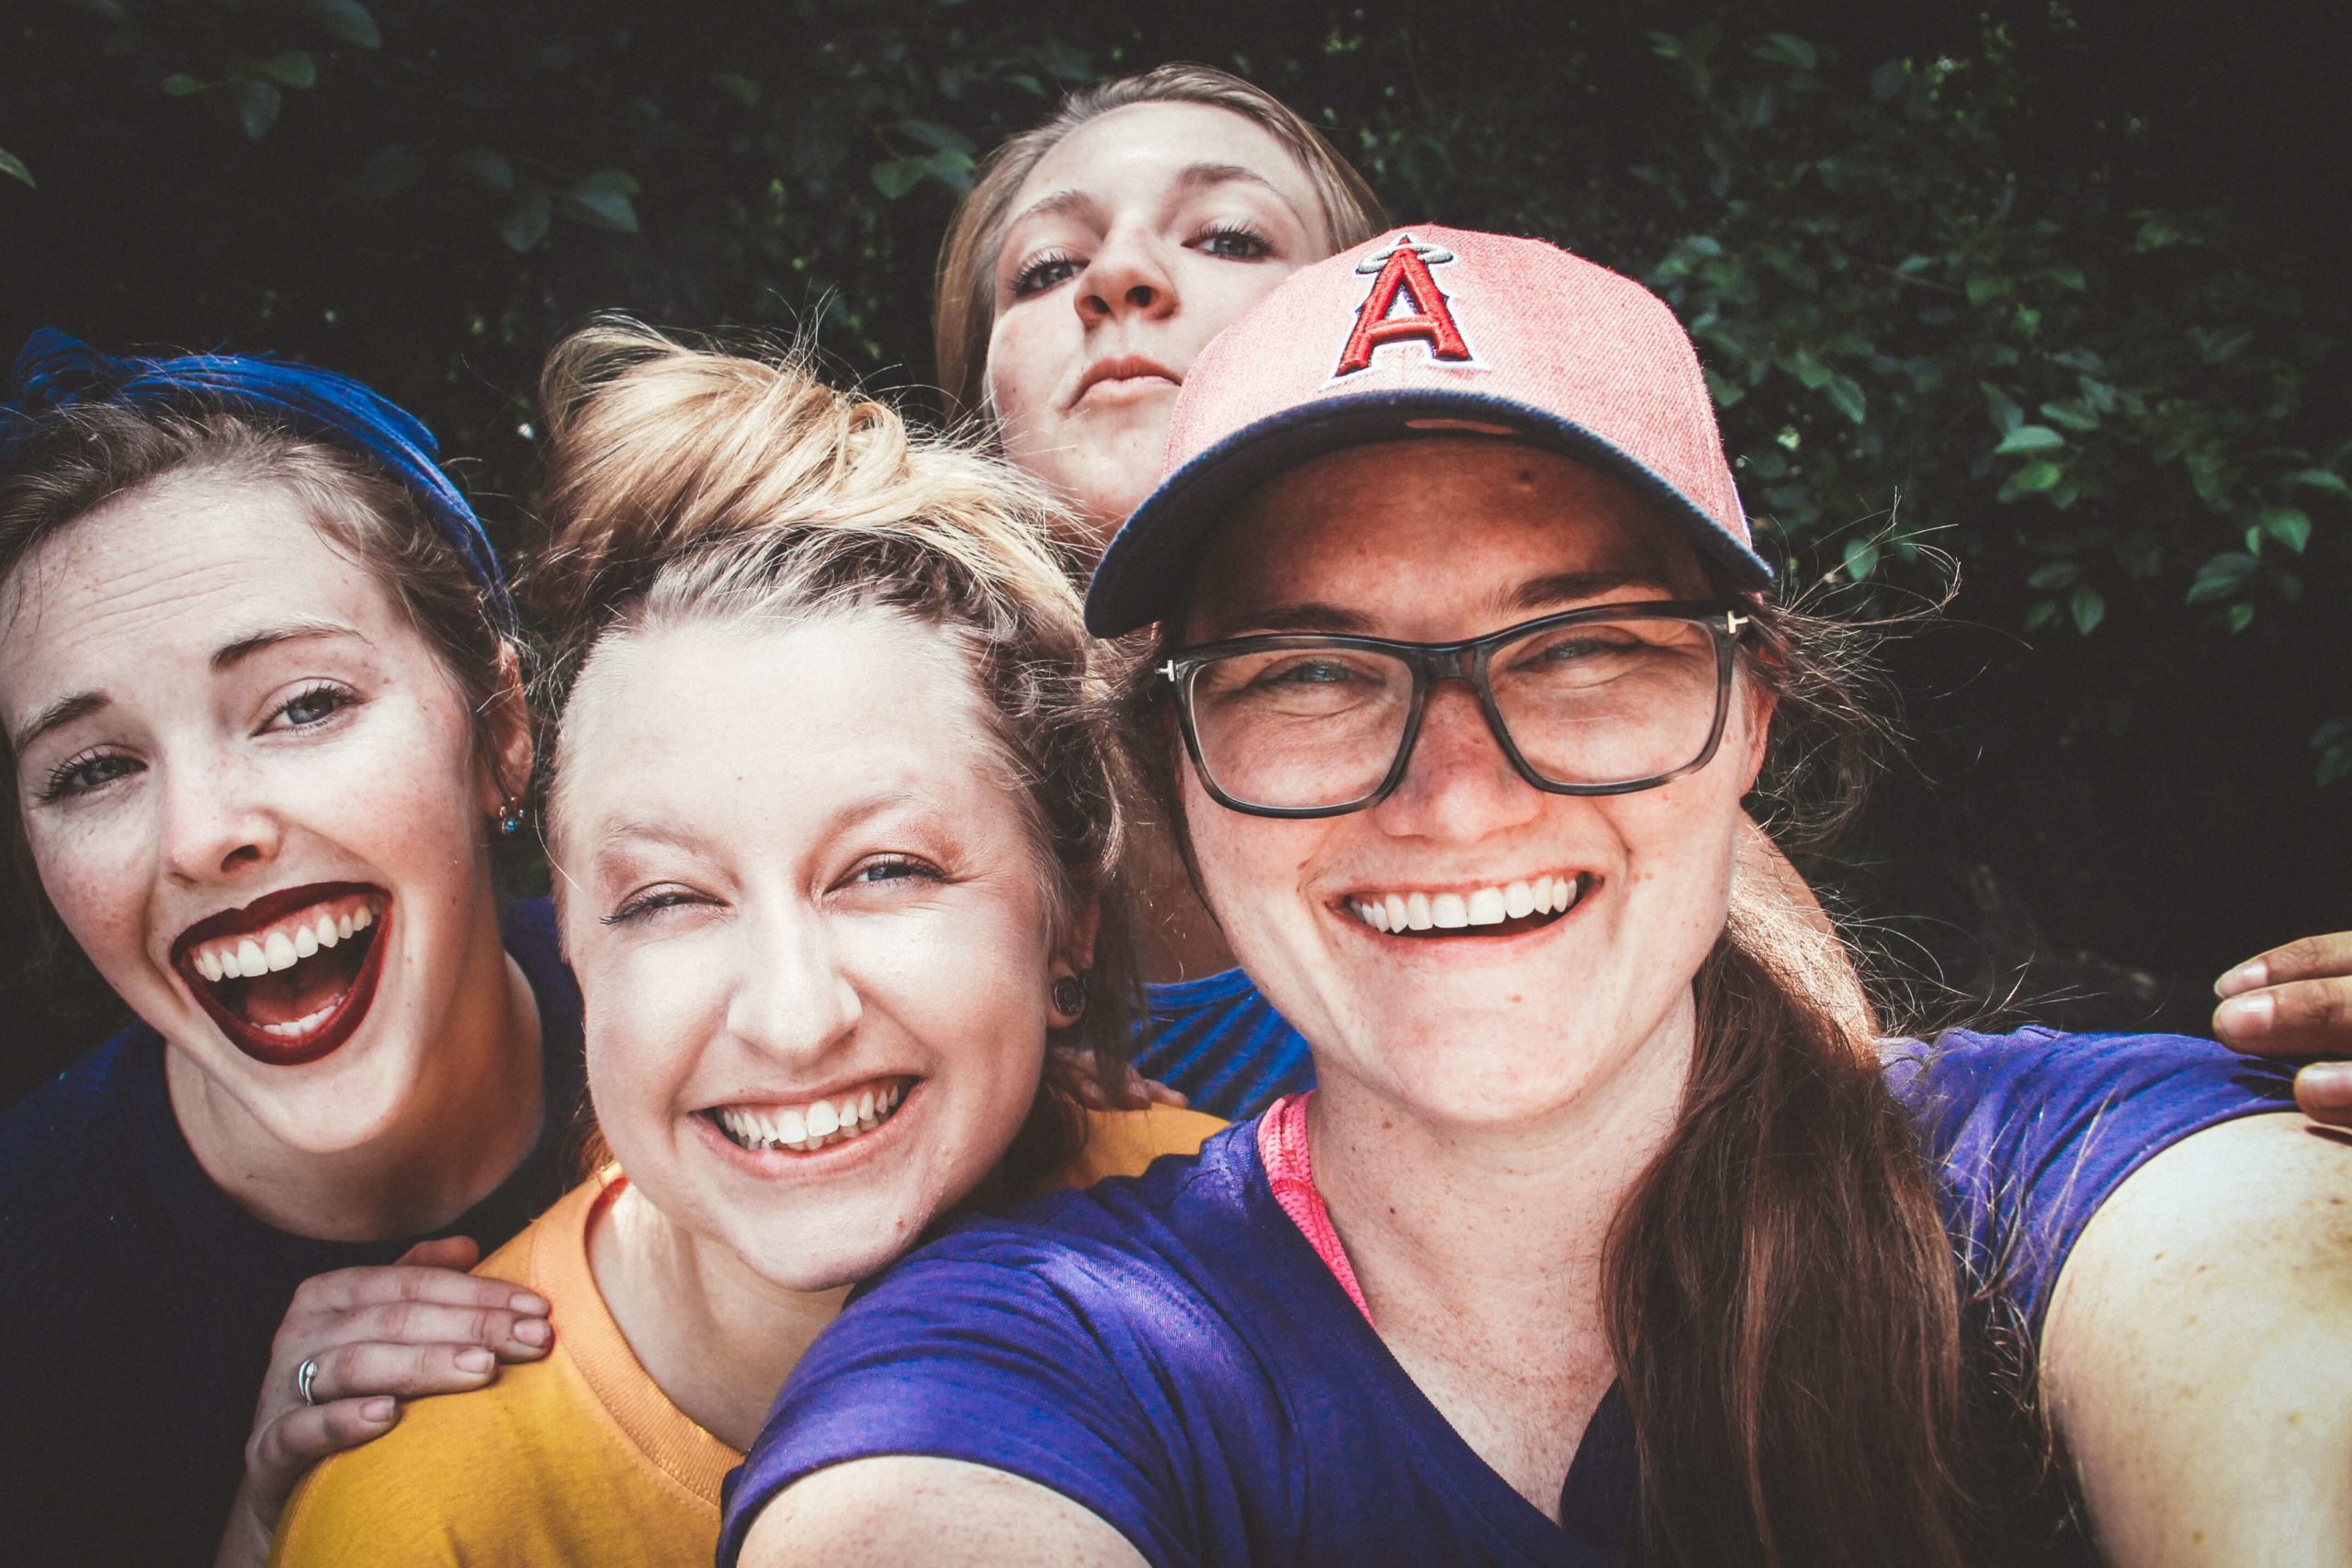 4 women taking a slefie outdoors. They are all smiling and laughing